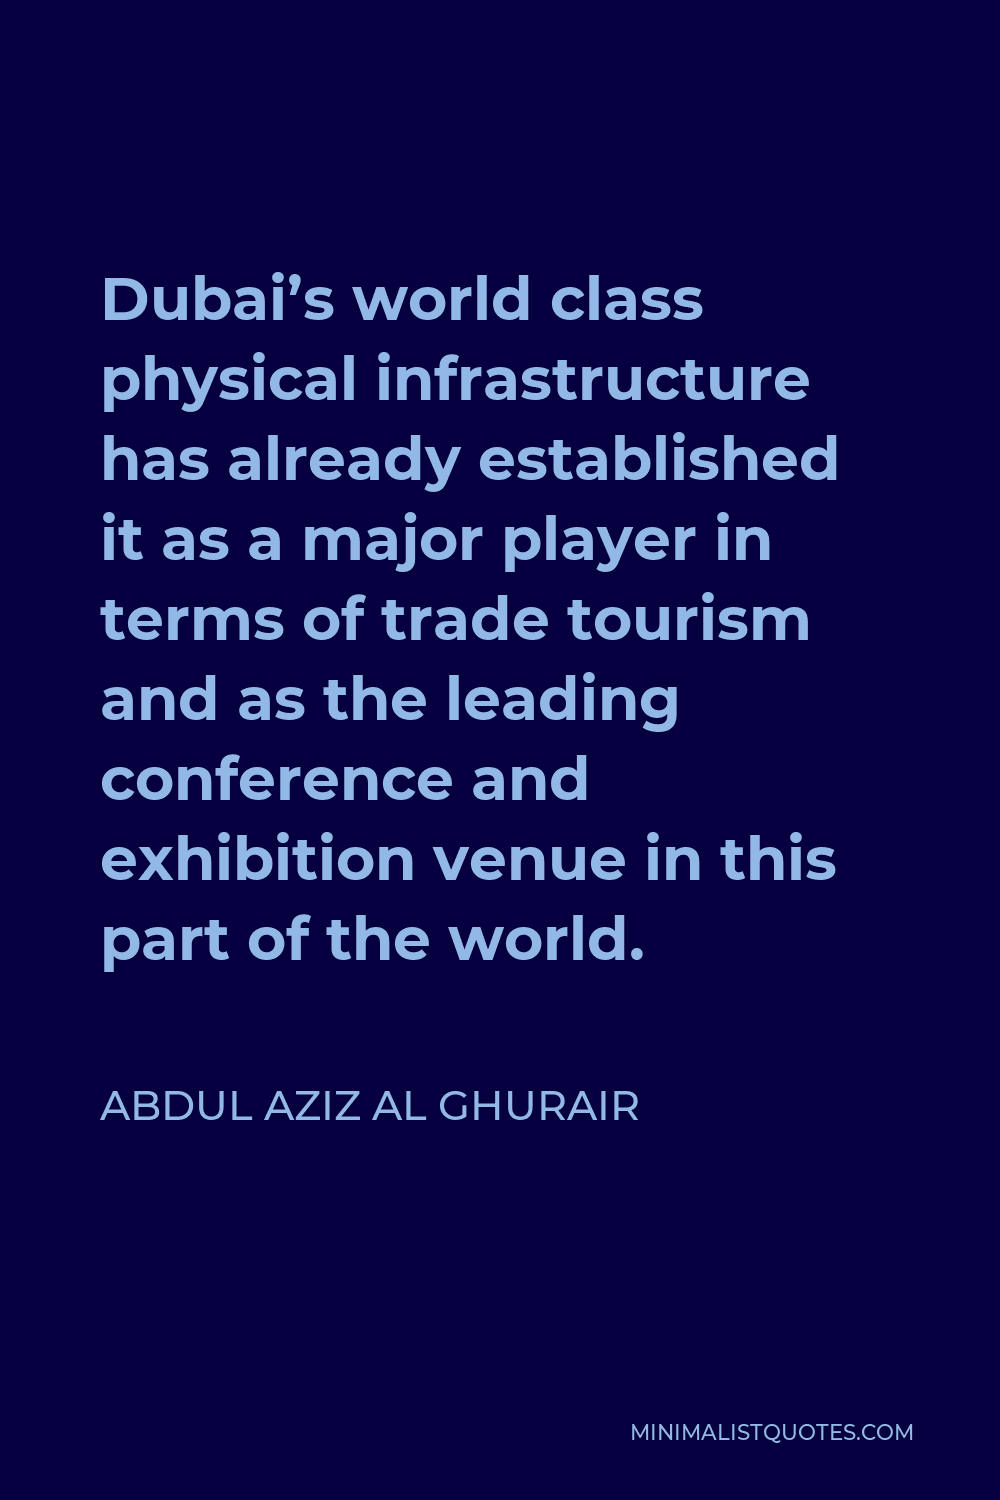 Abdul Aziz Al Ghurair Quote - Dubai’s world class physical infrastructure has already established it as a major player in terms of trade tourism and as the leading conference and exhibition venue in this part of the world.